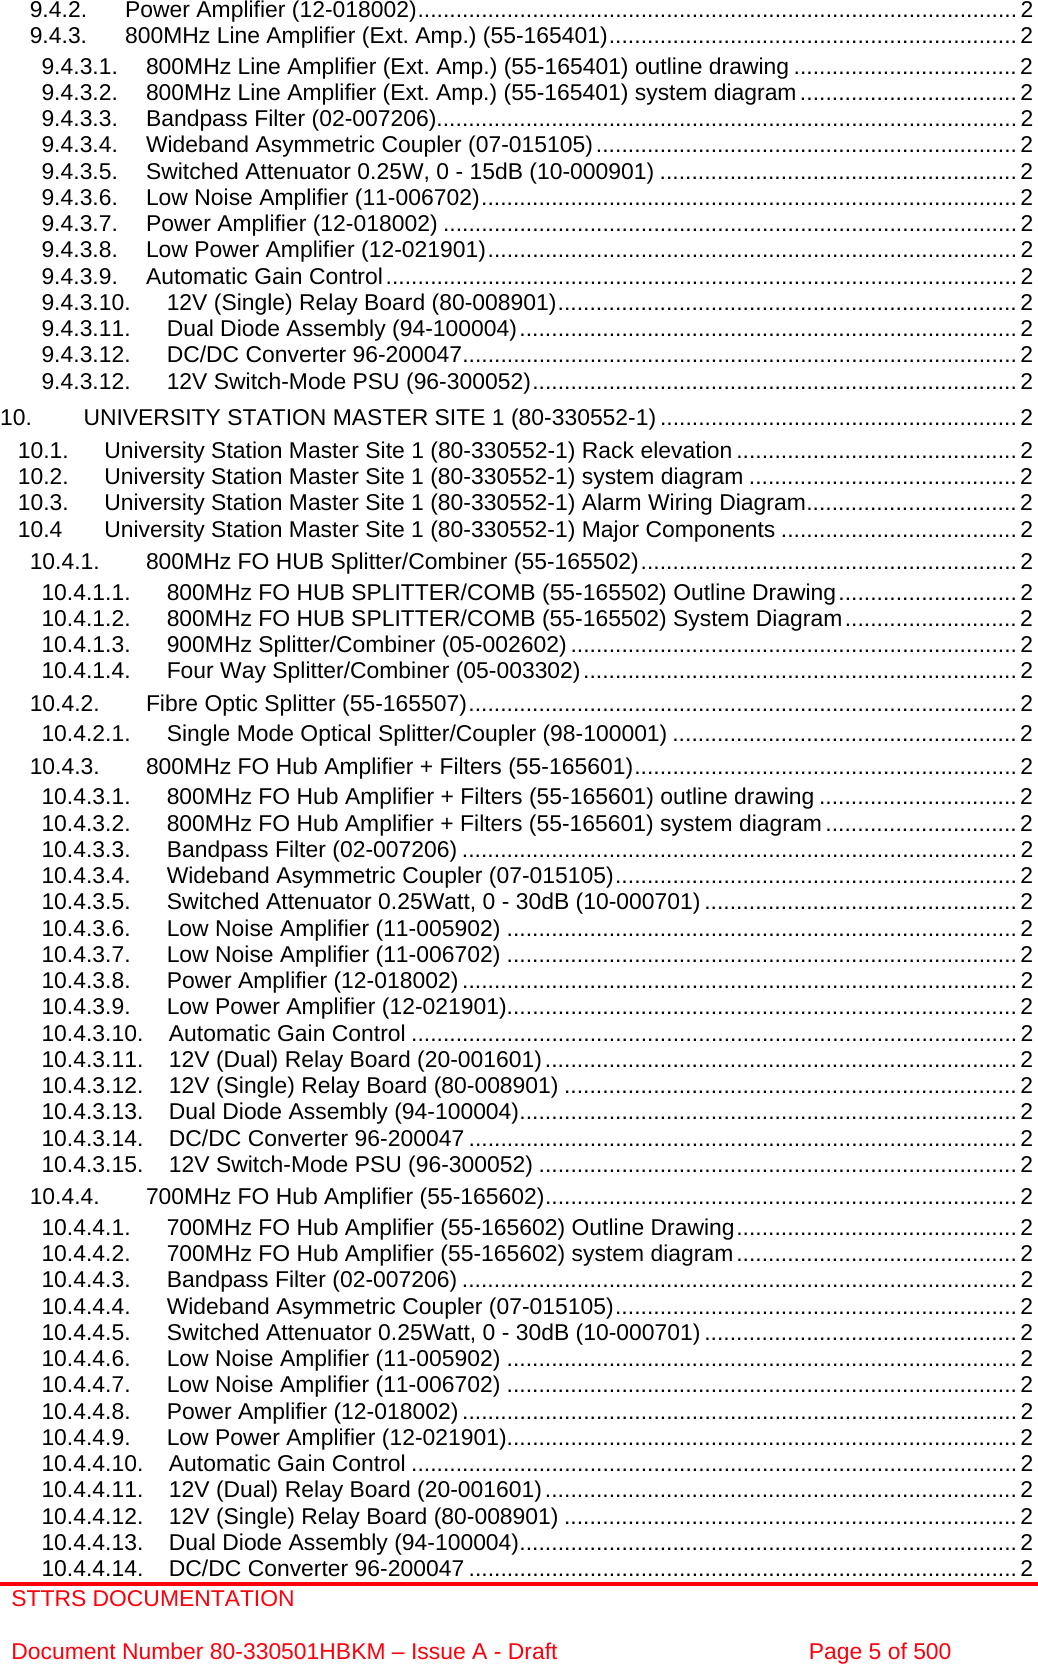 STTRS DOCUMENTATION  Document Number 80-330501HBKM – Issue A - Draft  Page 5 of 500  9.4.2. Power Amplifier (12-018002)..............................................................................................2 9.4.3. 800MHz Line Amplifier (Ext. Amp.) (55-165401)................................................................ 2 9.4.3.1. 800MHz Line Amplifier (Ext. Amp.) (55-165401) outline drawing ................................... 2 9.4.3.2. 800MHz Line Amplifier (Ext. Amp.) (55-165401) system diagram..................................2 9.4.3.3. Bandpass Filter (02-007206)...........................................................................................2 9.4.3.4. Wideband Asymmetric Coupler (07-015105).................................................................. 2 9.4.3.5. Switched Attenuator 0.25W, 0 - 15dB (10-000901) ........................................................ 2 9.4.3.6. Low Noise Amplifier (11-006702).................................................................................... 2 9.4.3.7. Power Amplifier (12-018002) .......................................................................................... 2 9.4.3.8. Low Power Amplifier (12-021901)...................................................................................2 9.4.3.9. Automatic Gain Control...................................................................................................2 9.4.3.10. 12V (Single) Relay Board (80-008901)........................................................................ 2 9.4.3.11. Dual Diode Assembly (94-100004)..............................................................................2 9.4.3.12. DC/DC Converter 96-200047....................................................................................... 2 9.4.3.12. 12V Switch-Mode PSU (96-300052)............................................................................ 2 10. UNIVERSITY STATION MASTER SITE 1 (80-330552-1) ........................................................ 2 10.1. University Station Master Site 1 (80-330552-1) Rack elevation ............................................2 10.2. University Station Master Site 1 (80-330552-1) system diagram .......................................... 2 10.3. University Station Master Site 1 (80-330552-1) Alarm Wiring Diagram................................. 2 10.4 University Station Master Site 1 (80-330552-1) Major Components ..................................... 2 10.4.1. 800MHz FO HUB Splitter/Combiner (55-165502)........................................................... 2 10.4.1.1. 800MHz FO HUB SPLITTER/COMB (55-165502) Outline Drawing............................ 2 10.4.1.2. 800MHz FO HUB SPLITTER/COMB (55-165502) System Diagram...........................2 10.4.1.3. 900MHz Splitter/Combiner (05-002602) ...................................................................... 2 10.4.1.4. Four Way Splitter/Combiner (05-003302)....................................................................2 10.4.2. Fibre Optic Splitter (55-165507)...................................................................................... 2 10.4.2.1. Single Mode Optical Splitter/Coupler (98-100001) ......................................................2 10.4.3. 800MHz FO Hub Amplifier + Filters (55-165601)............................................................ 2 10.4.3.1. 800MHz FO Hub Amplifier + Filters (55-165601) outline drawing ............................... 2 10.4.3.2. 800MHz FO Hub Amplifier + Filters (55-165601) system diagram .............................. 2 10.4.3.3. Bandpass Filter (02-007206) ....................................................................................... 2 10.4.3.4. Wideband Asymmetric Coupler (07-015105)............................................................... 2 10.4.3.5. Switched Attenuator 0.25Watt, 0 - 30dB (10-000701) ................................................. 2 10.4.3.6. Low Noise Amplifier (11-005902) ................................................................................2 10.4.3.7. Low Noise Amplifier (11-006702) ................................................................................2 10.4.3.8. Power Amplifier (12-018002) ....................................................................................... 2 10.4.3.9. Low Power Amplifier (12-021901)................................................................................2 10.4.3.10. Automatic Gain Control ............................................................................................... 2 10.4.3.11. 12V (Dual) Relay Board (20-001601).......................................................................... 2 10.4.3.12. 12V (Single) Relay Board (80-008901) ....................................................................... 2 10.4.3.13. Dual Diode Assembly (94-100004).............................................................................. 2 10.4.3.14. DC/DC Converter 96-200047 ...................................................................................... 2 10.4.3.15. 12V Switch-Mode PSU (96-300052) ........................................................................... 2 10.4.4. 700MHz FO Hub Amplifier (55-165602).......................................................................... 2 10.4.4.1. 700MHz FO Hub Amplifier (55-165602) Outline Drawing............................................2 10.4.4.2. 700MHz FO Hub Amplifier (55-165602) system diagram............................................ 2 10.4.4.3. Bandpass Filter (02-007206) ....................................................................................... 2 10.4.4.4. Wideband Asymmetric Coupler (07-015105)............................................................... 2 10.4.4.5. Switched Attenuator 0.25Watt, 0 - 30dB (10-000701) ................................................. 2 10.4.4.6. Low Noise Amplifier (11-005902) ................................................................................2 10.4.4.7. Low Noise Amplifier (11-006702) ................................................................................2 10.4.4.8. Power Amplifier (12-018002) ....................................................................................... 2 10.4.4.9. Low Power Amplifier (12-021901)................................................................................2 10.4.4.10. Automatic Gain Control ............................................................................................... 2 10.4.4.11. 12V (Dual) Relay Board (20-001601).......................................................................... 2 10.4.4.12. 12V (Single) Relay Board (80-008901) ....................................................................... 2 10.4.4.13. Dual Diode Assembly (94-100004).............................................................................. 2 10.4.4.14. DC/DC Converter 96-200047 ...................................................................................... 2 